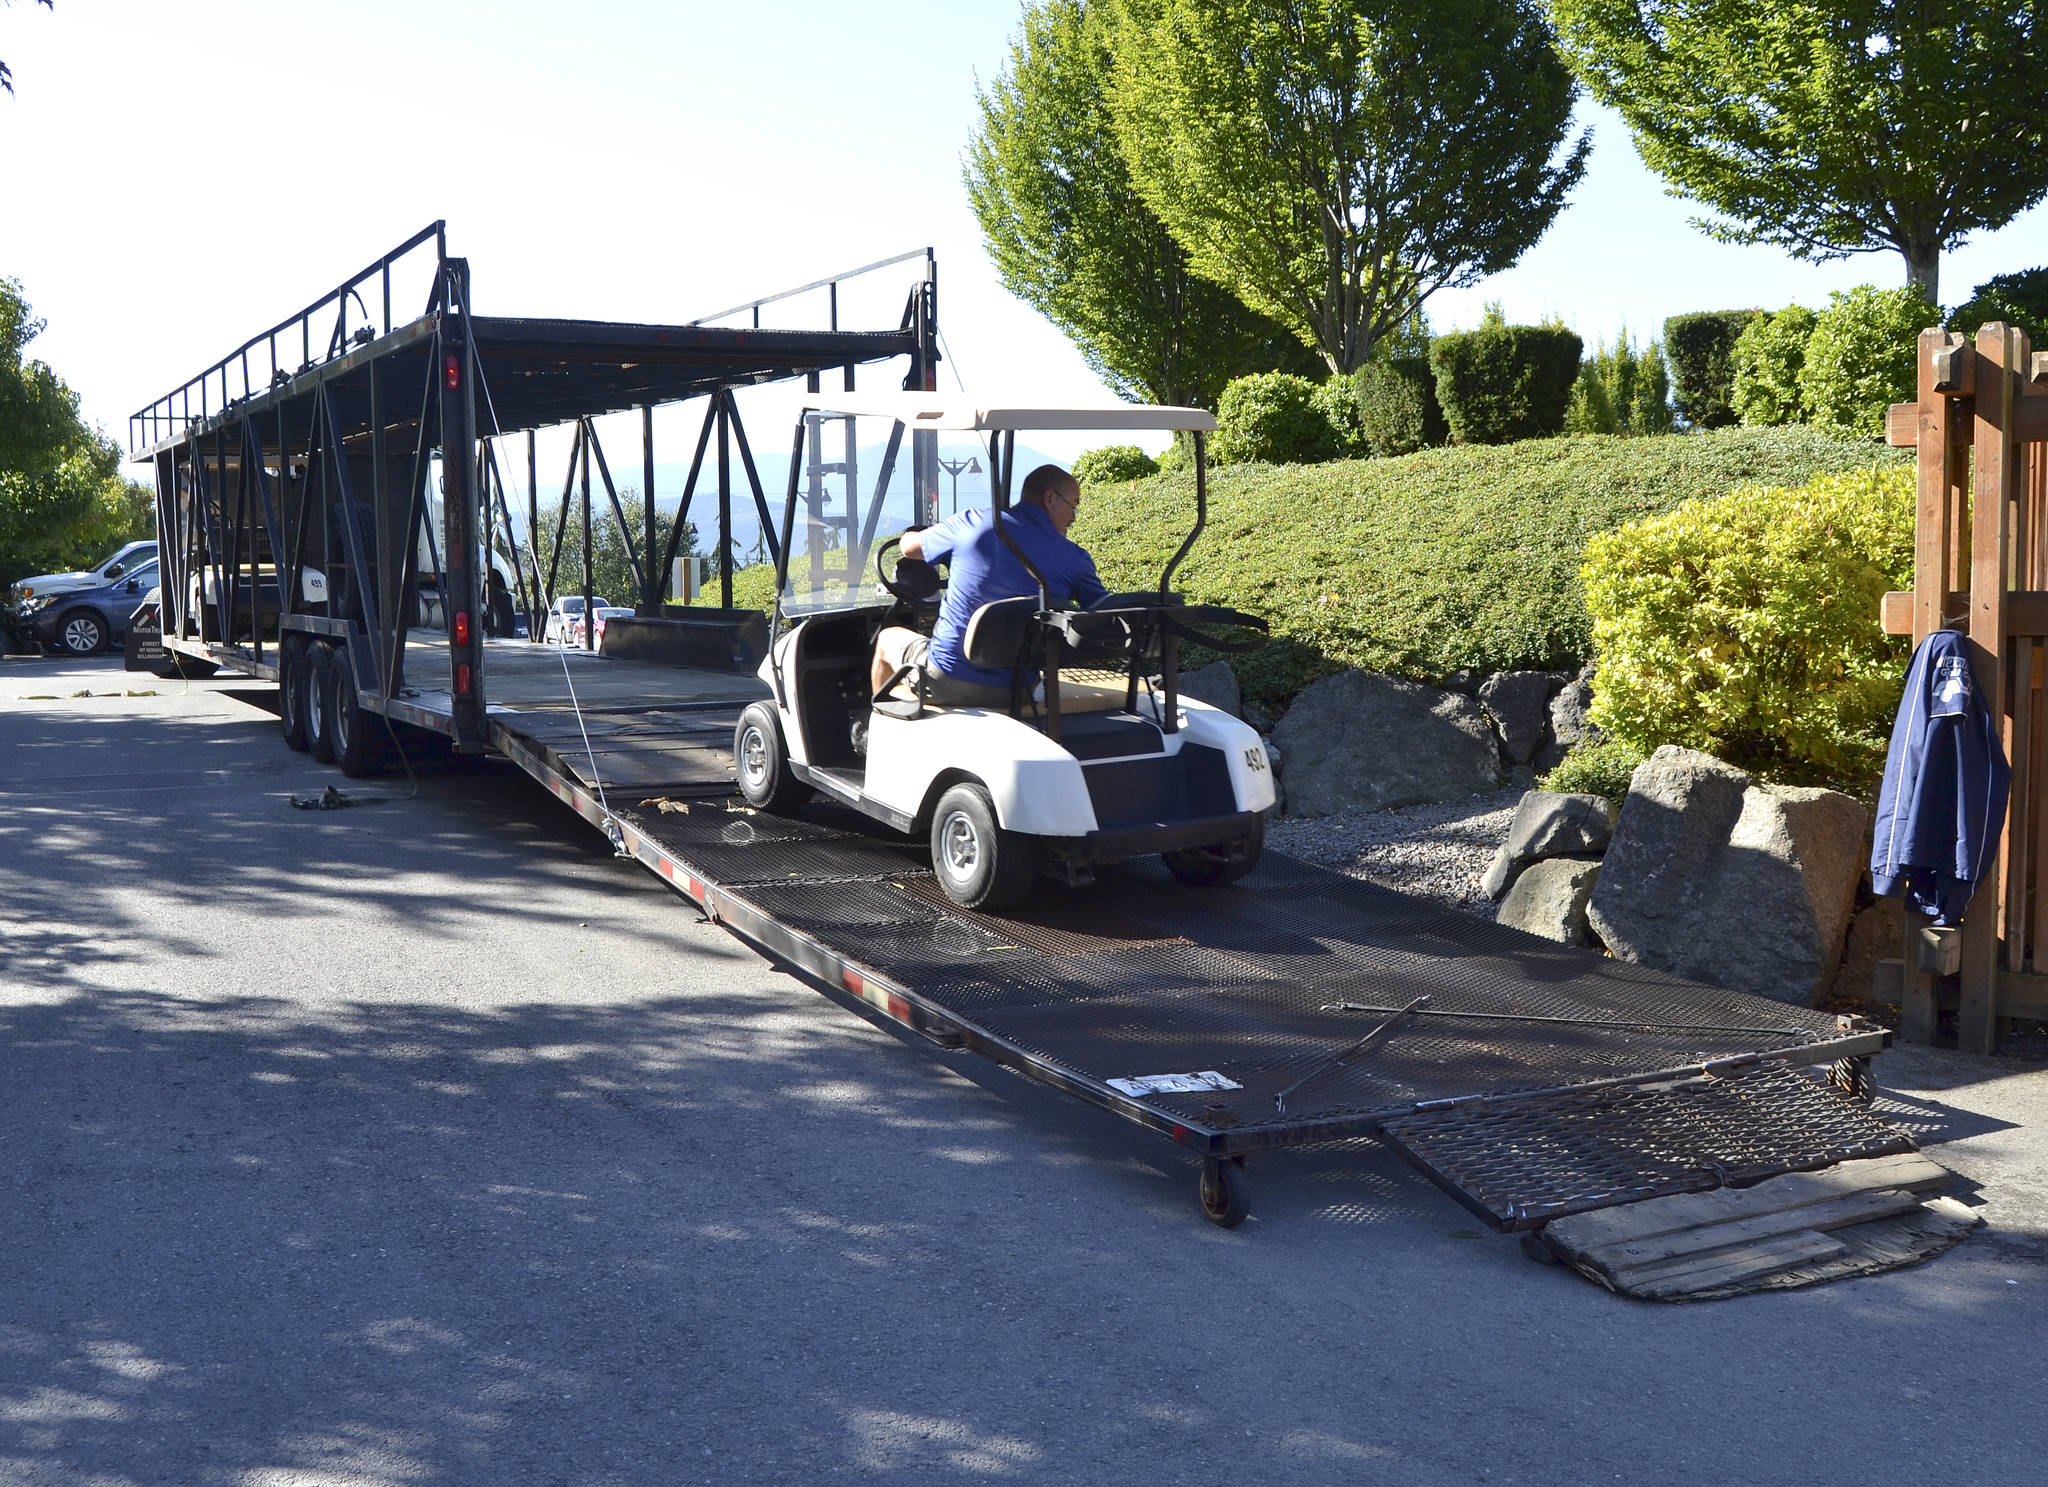 Following a fire that destroyed about 50 golf carts at the Cedars at Dungeness on Sept. 16, local golf courses including SkyRidge Golf Course and Peninsula Golf Club donated a few carts to borrow. Staff with Gold Mountain Golf Course in Bremerton, pictured, dropped off about 30 carts on Monday for the course to rent through the fall. Sequim Gazette photo by Matthew Nash